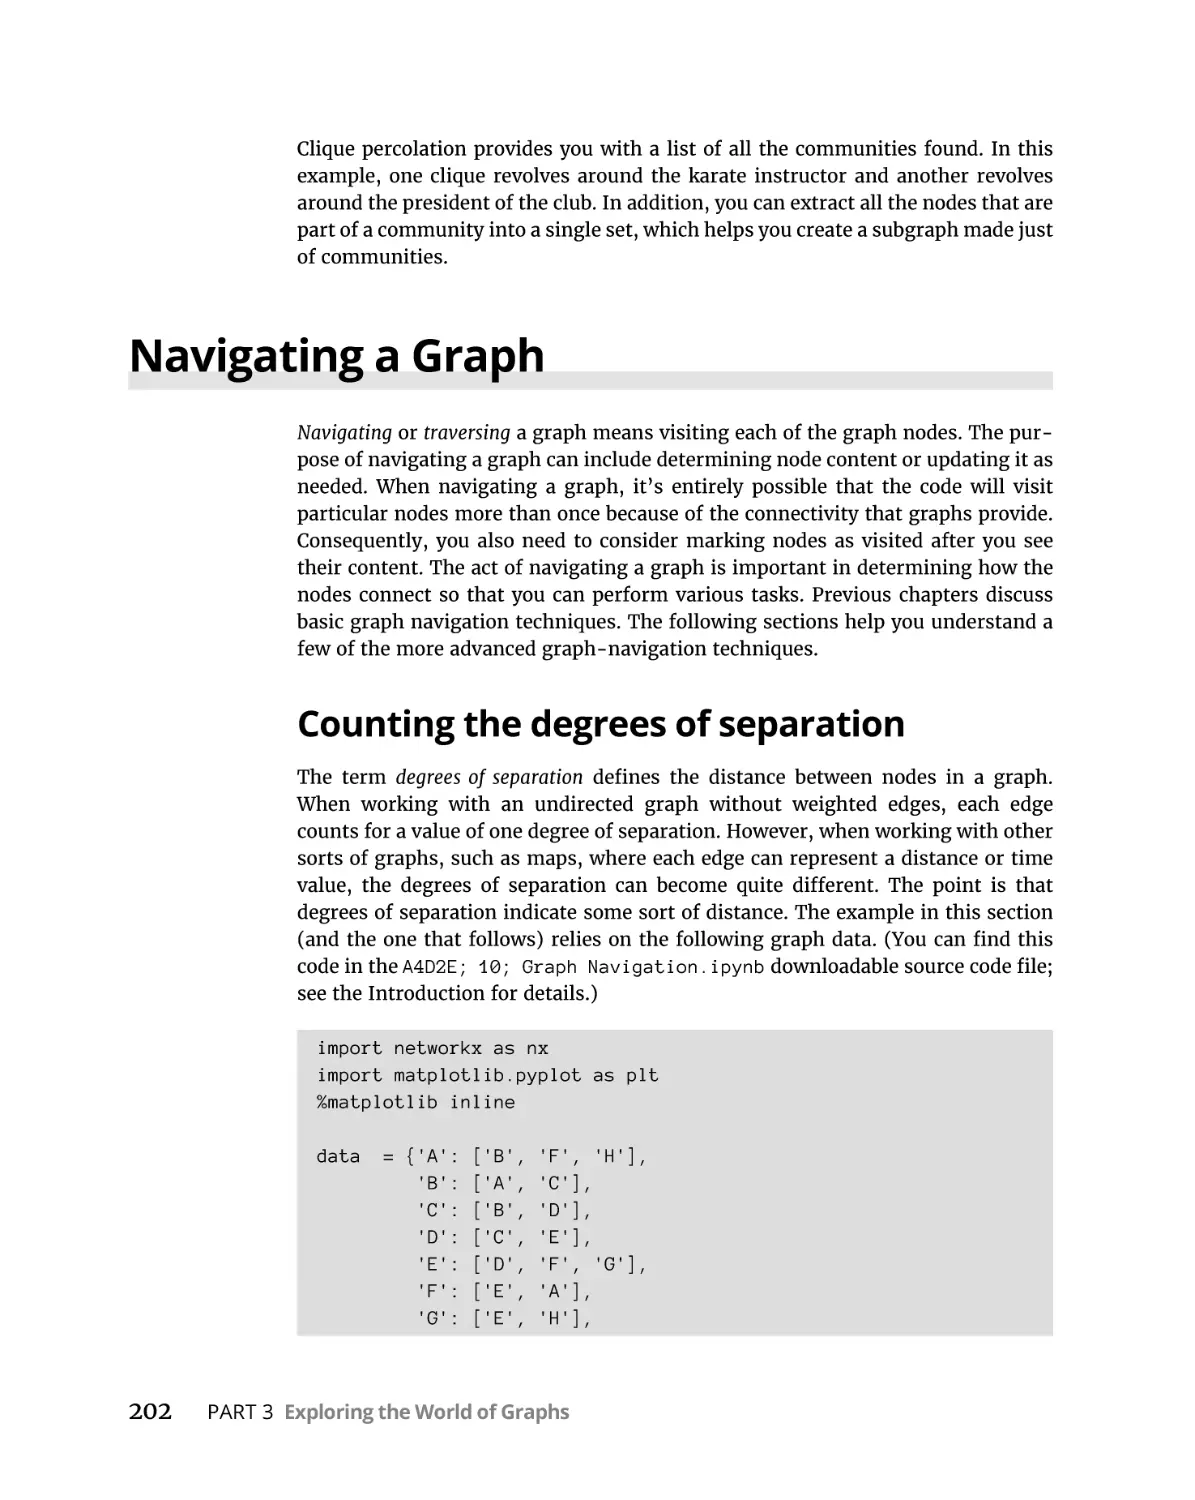 Navigating a Graph
Counting the degrees of separation